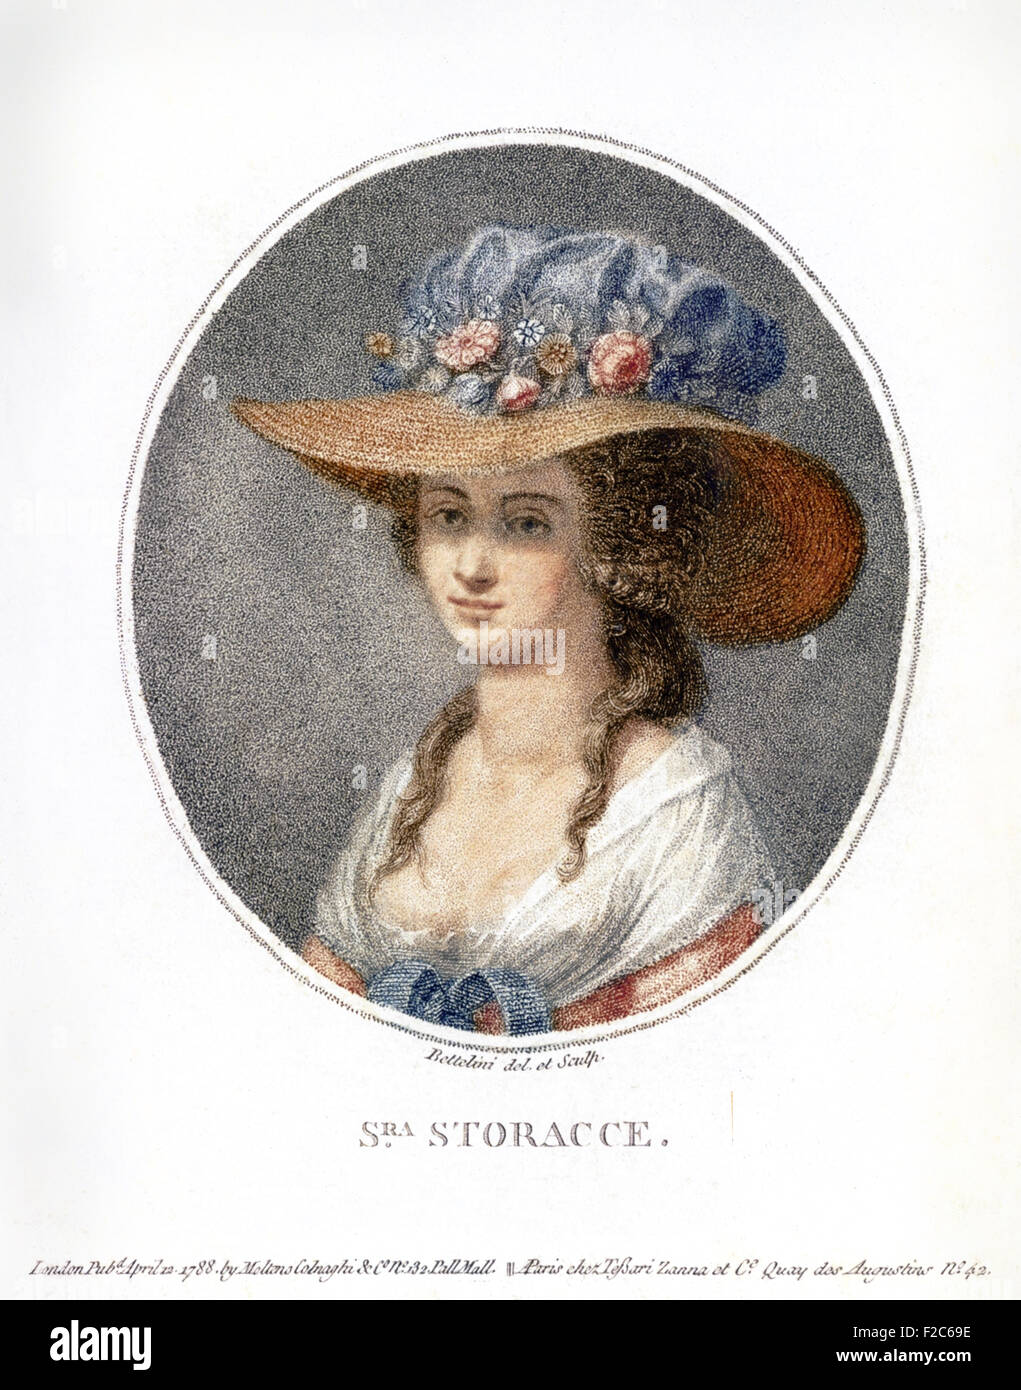 Portrait of Nancy Storace (Ann Selina Storace) (1765-1817), English operatic soprano singer published in 1788. W.A. Mozart  wrote the role of Susanna, the countess's maid in 'The Marriage of Figaro', which premiered in Vienna in 1786 especially for her. For unknown personal reasons, she returned to London in 1787 and continued to sing in her brother, Stephen Storace's operas until retiring in 1808. Engraving by Pietro Bettelini (1763-1829) with contemporary hand colouring.  Credit: Private Collection / AF Fotografie Stock Photo